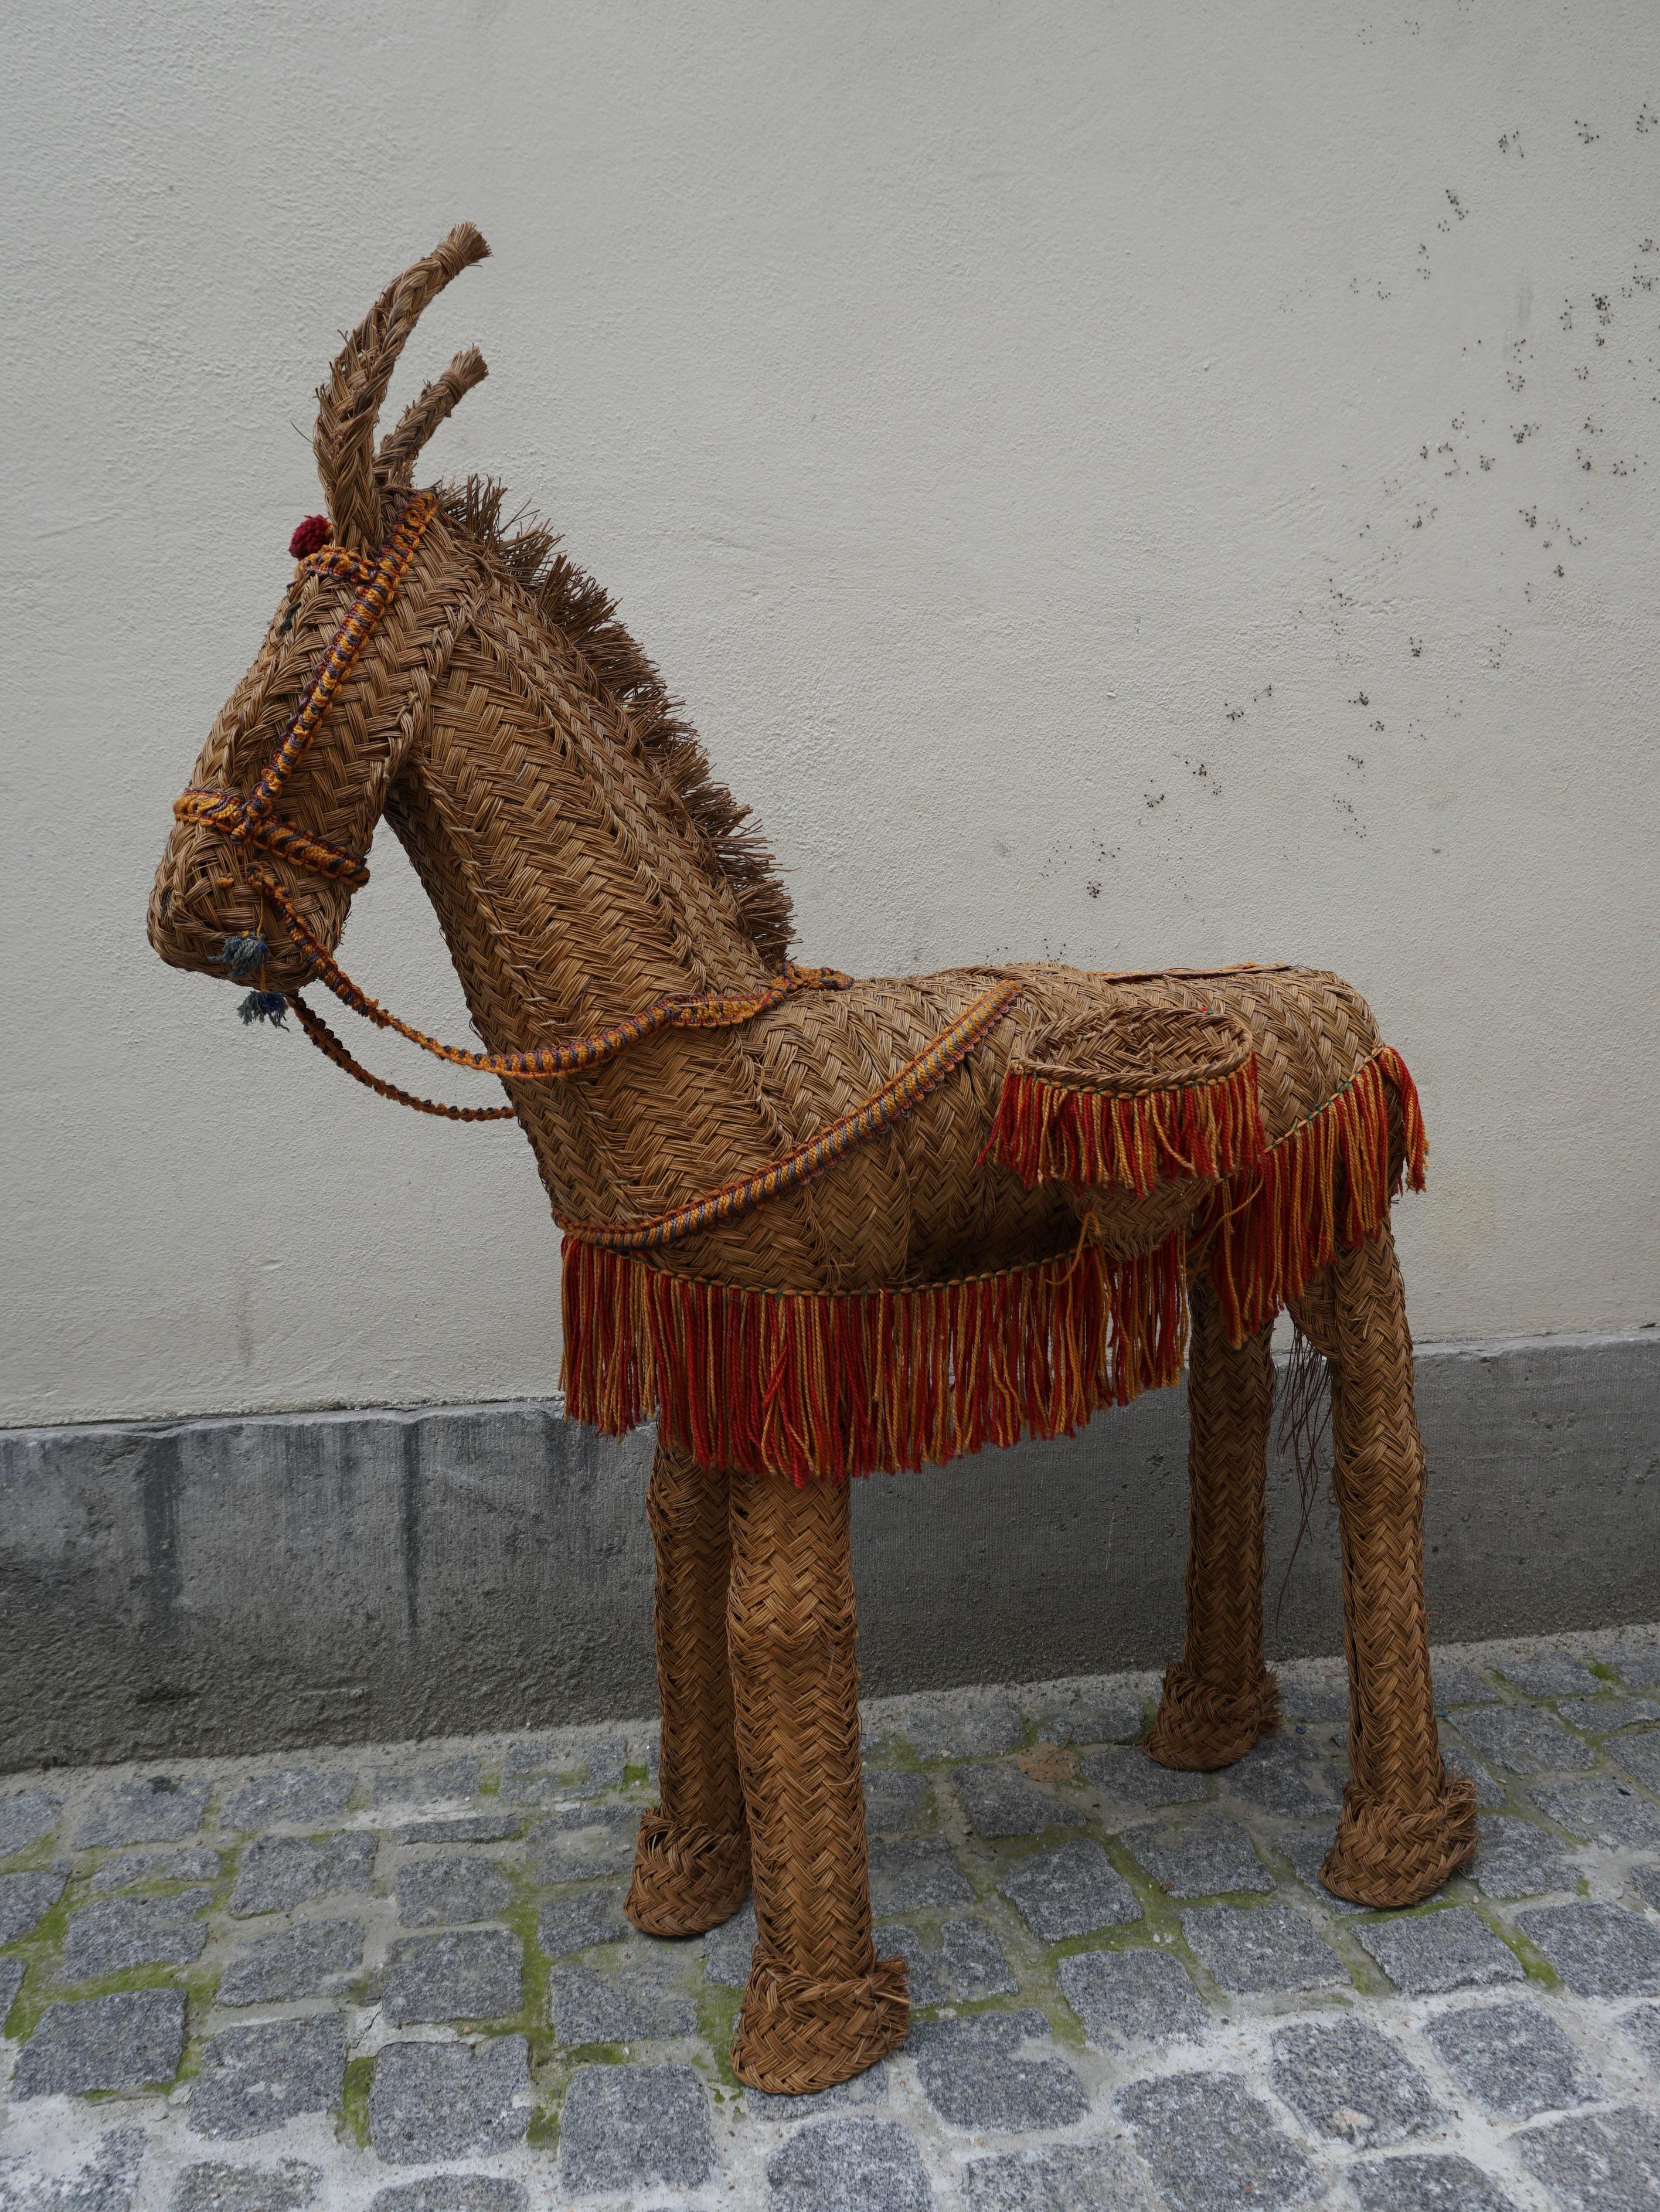 A decorative wicker donkey from Spain, circa 1950s.An artisan piece with a rustic, Mediterranean feel. Wicker side baskets evoke goods sold at a market or roadside, while decorative fringe adds a carnival touch of color. The jaunty tilt of the ears